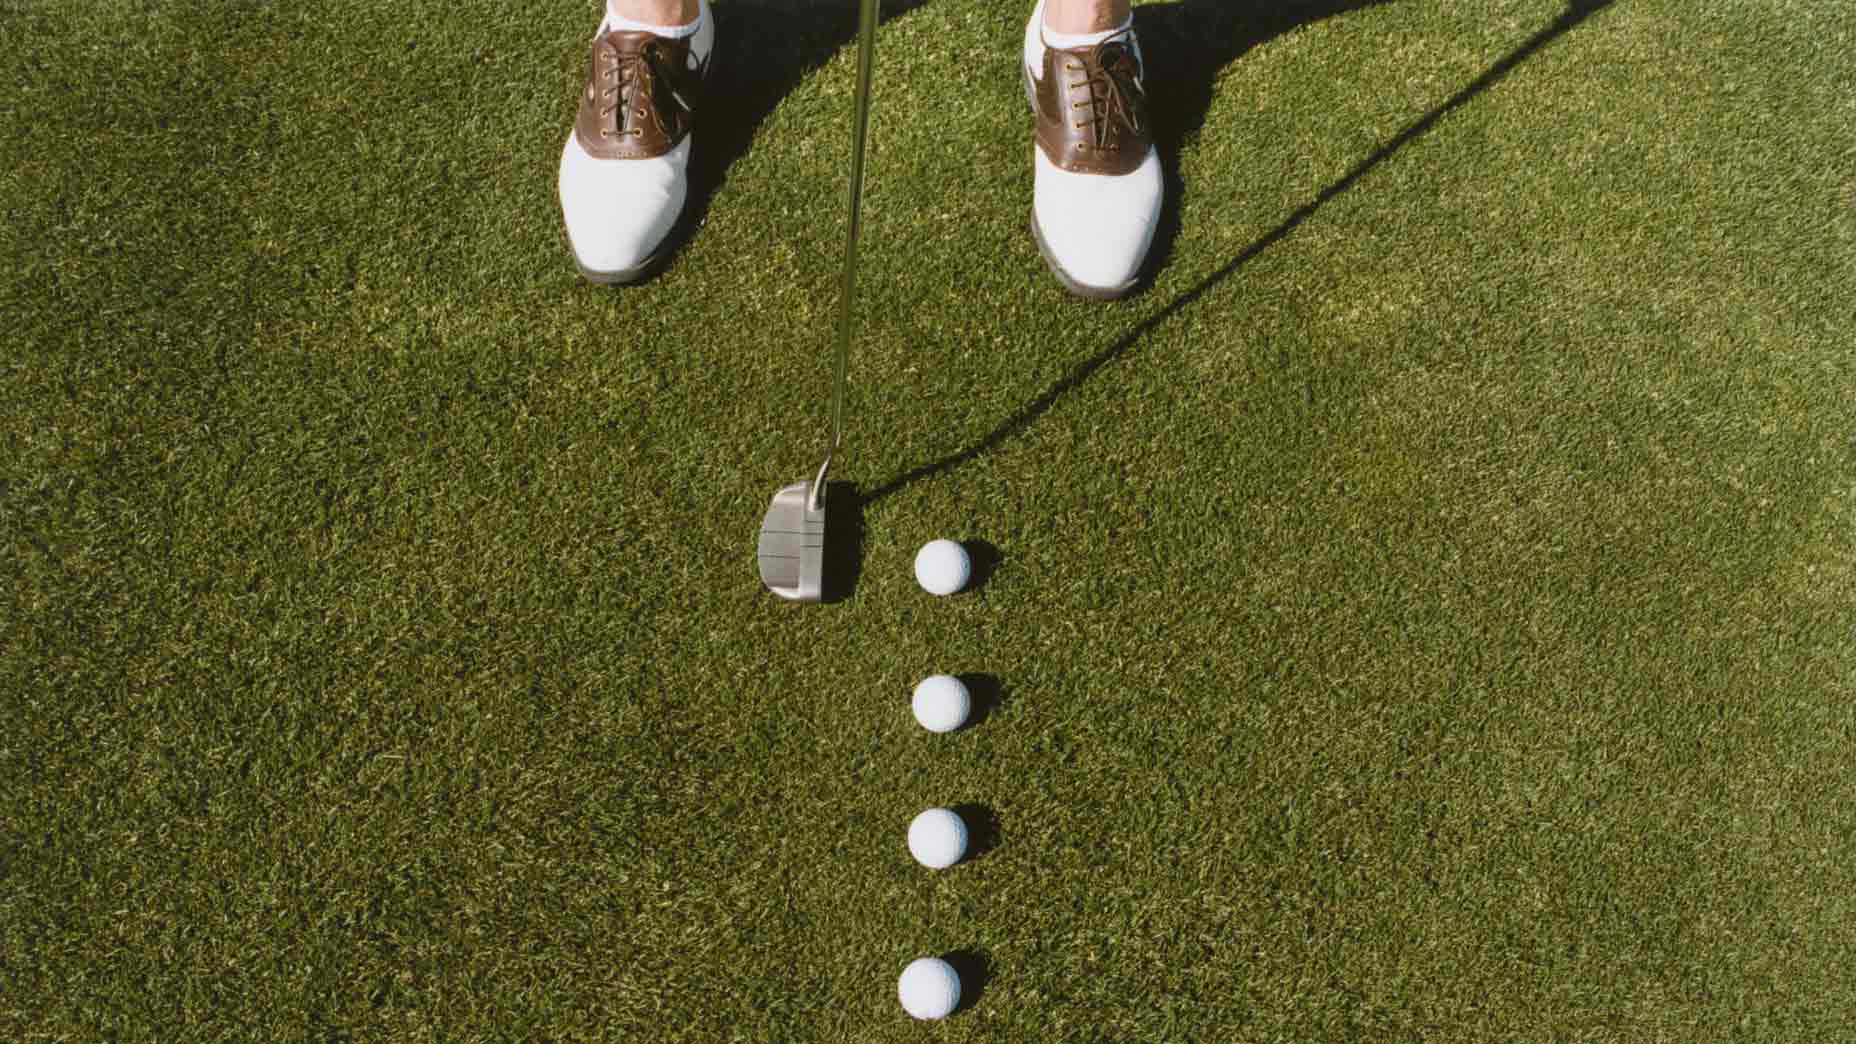 GOLF Teacher to Watch Adam Smith gives five quick and easy putting exercises to try at home that will help improve your stroke